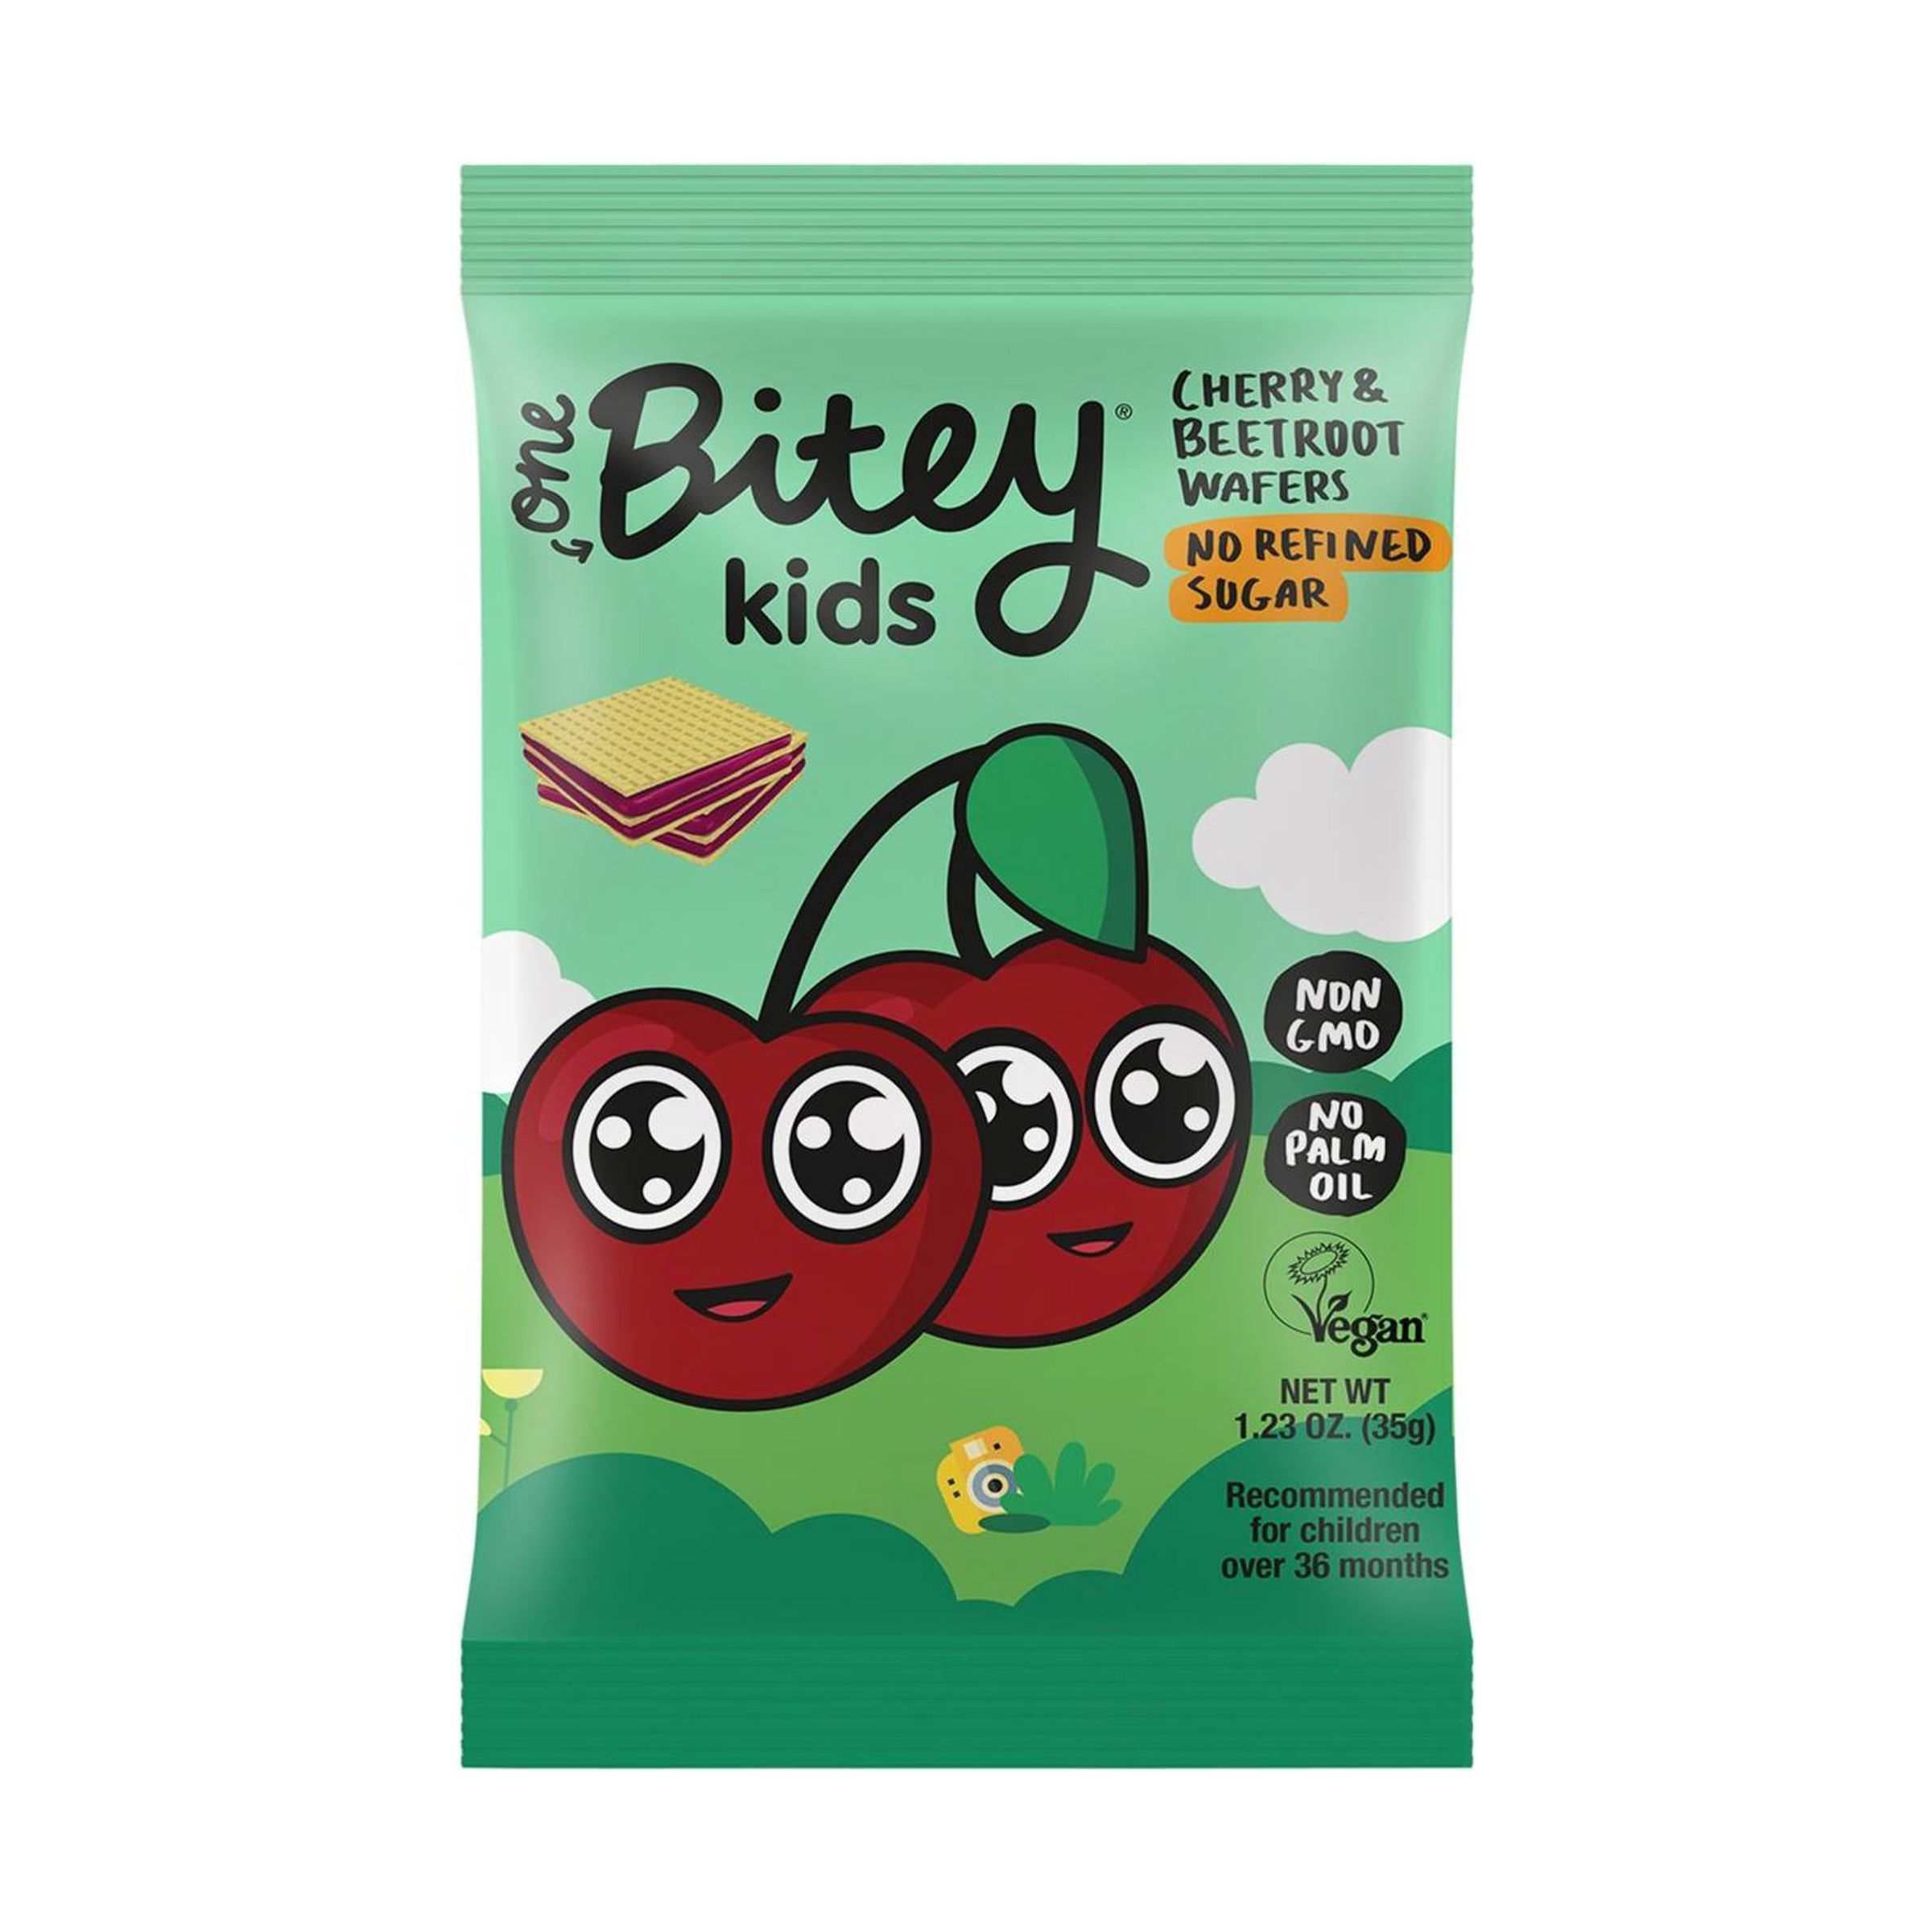 Cherry & Beetroot Wafers 35g 10673